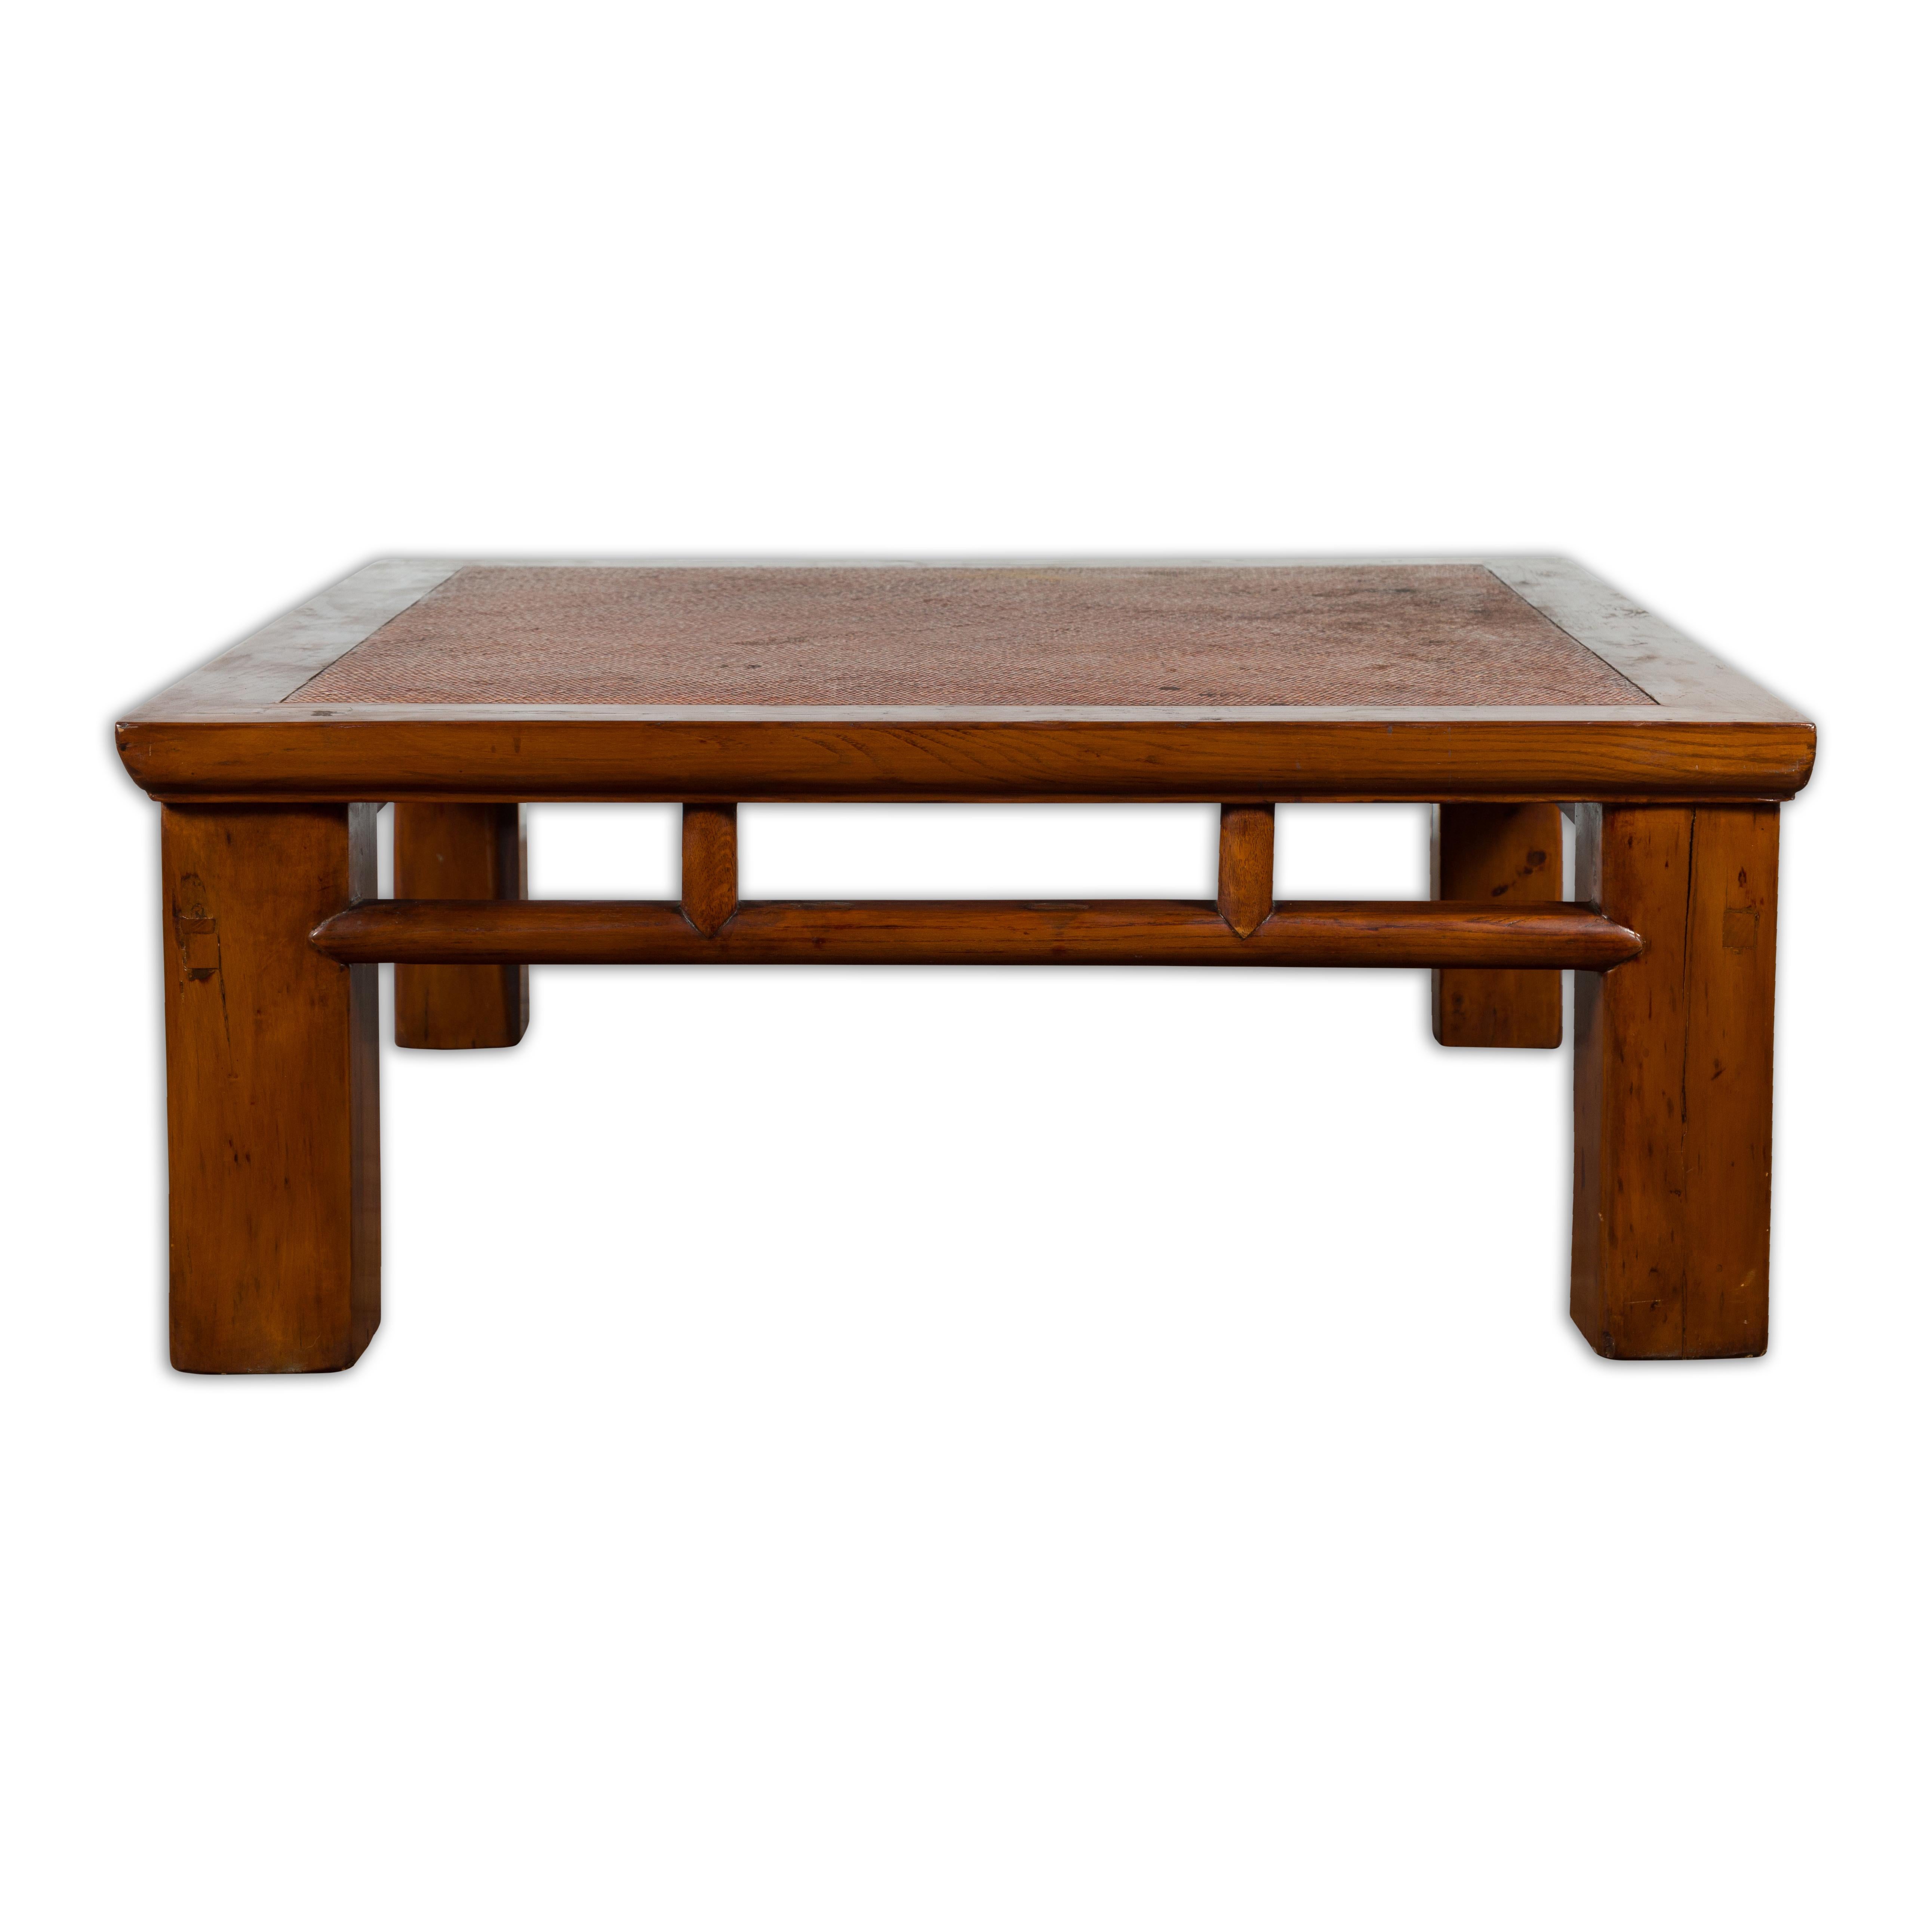 Qing Dynasty Chinese Elmwood Lohan Bed Coffee Table with Hand-Woven Rattan Top For Sale 15